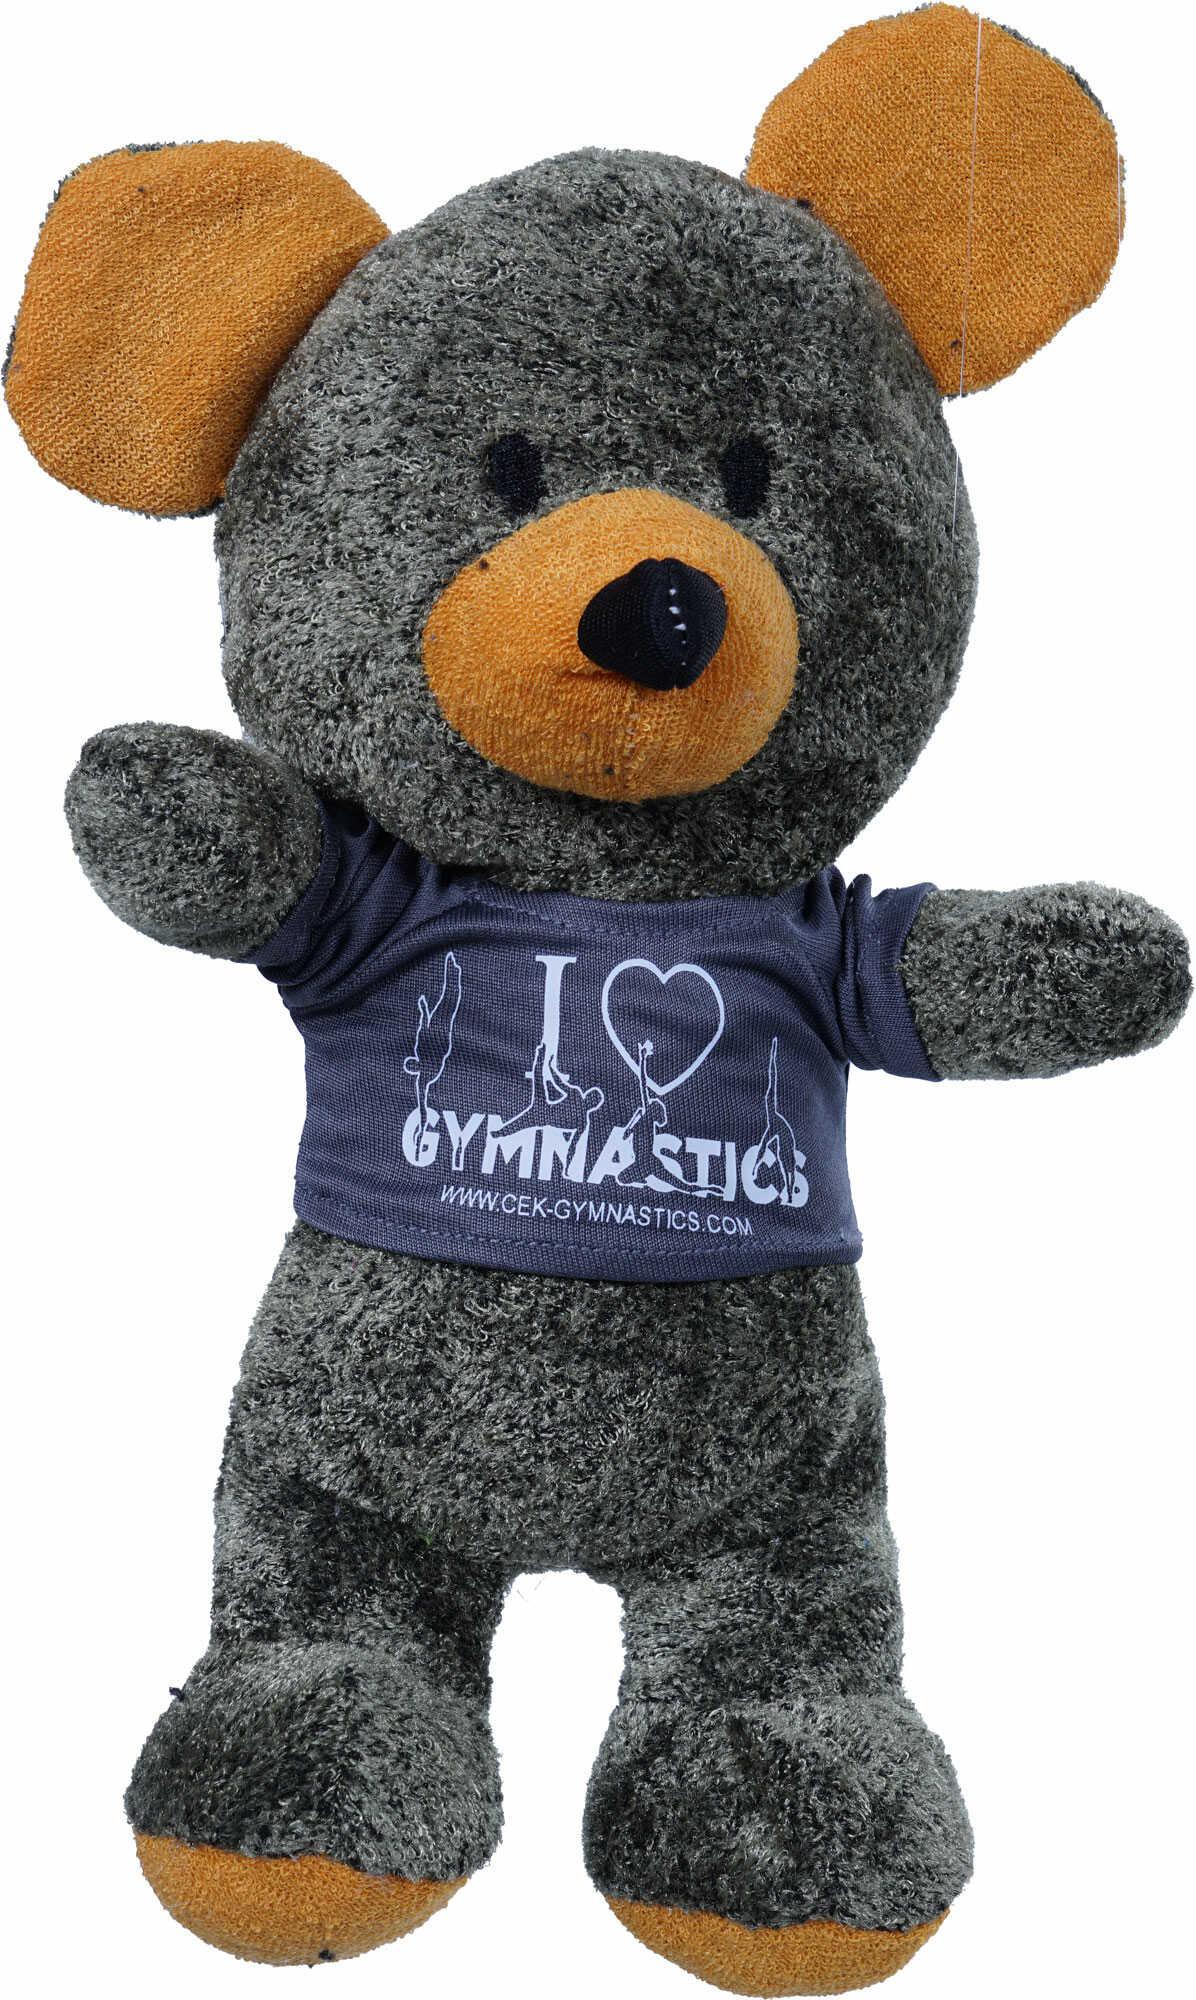 Mouse cuddly toy with promo t-shirt